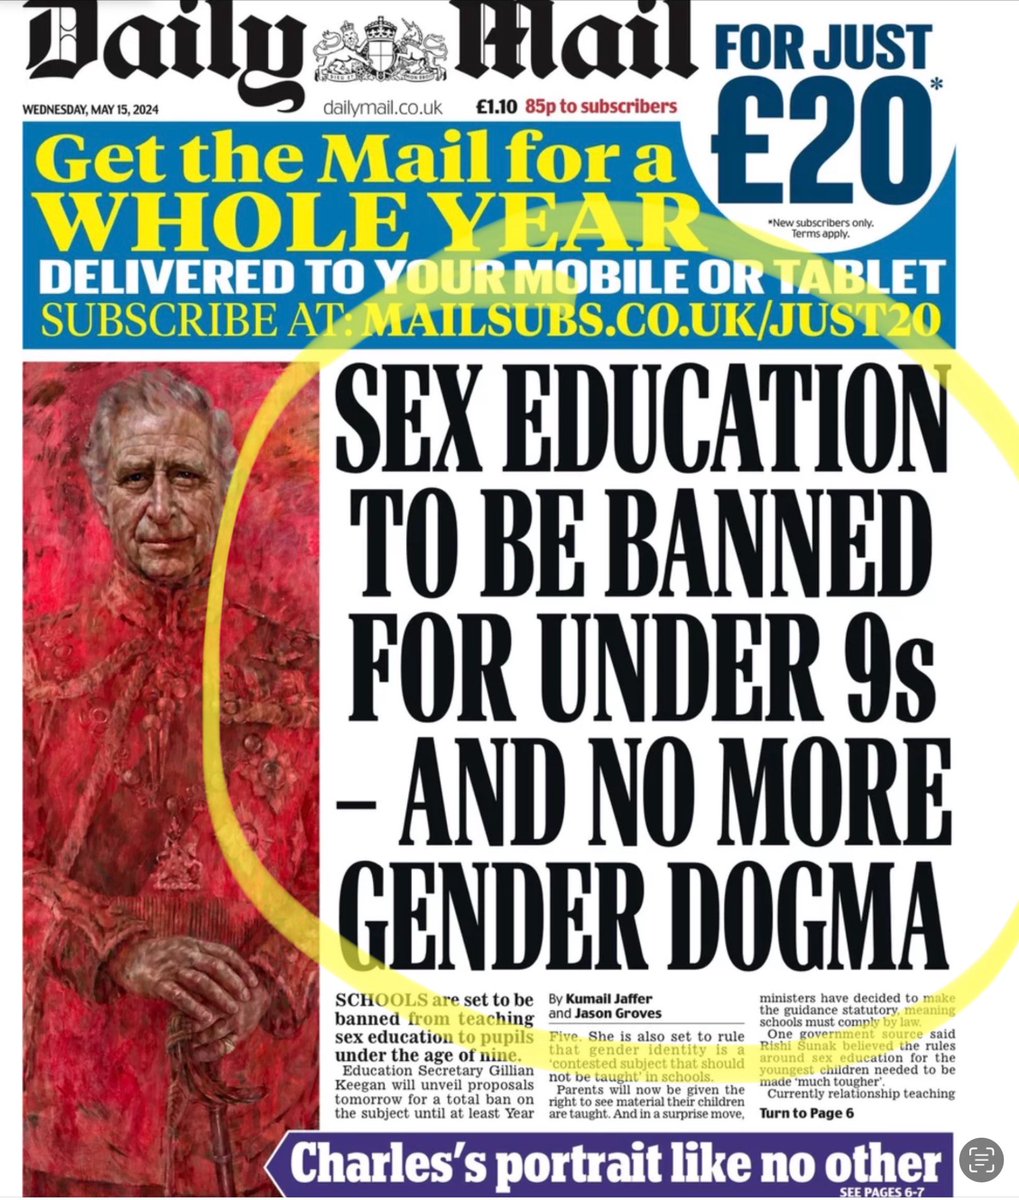 For anyone doubting the necessity of today’s intervention on sex-ed classes, last year’s @Policy_Exchange report ‘Asleep At The Wheel’ is essential reading. Responses to hundreds of freedom of information acts evidenced the widespread penetration of gender ideology throughout UK